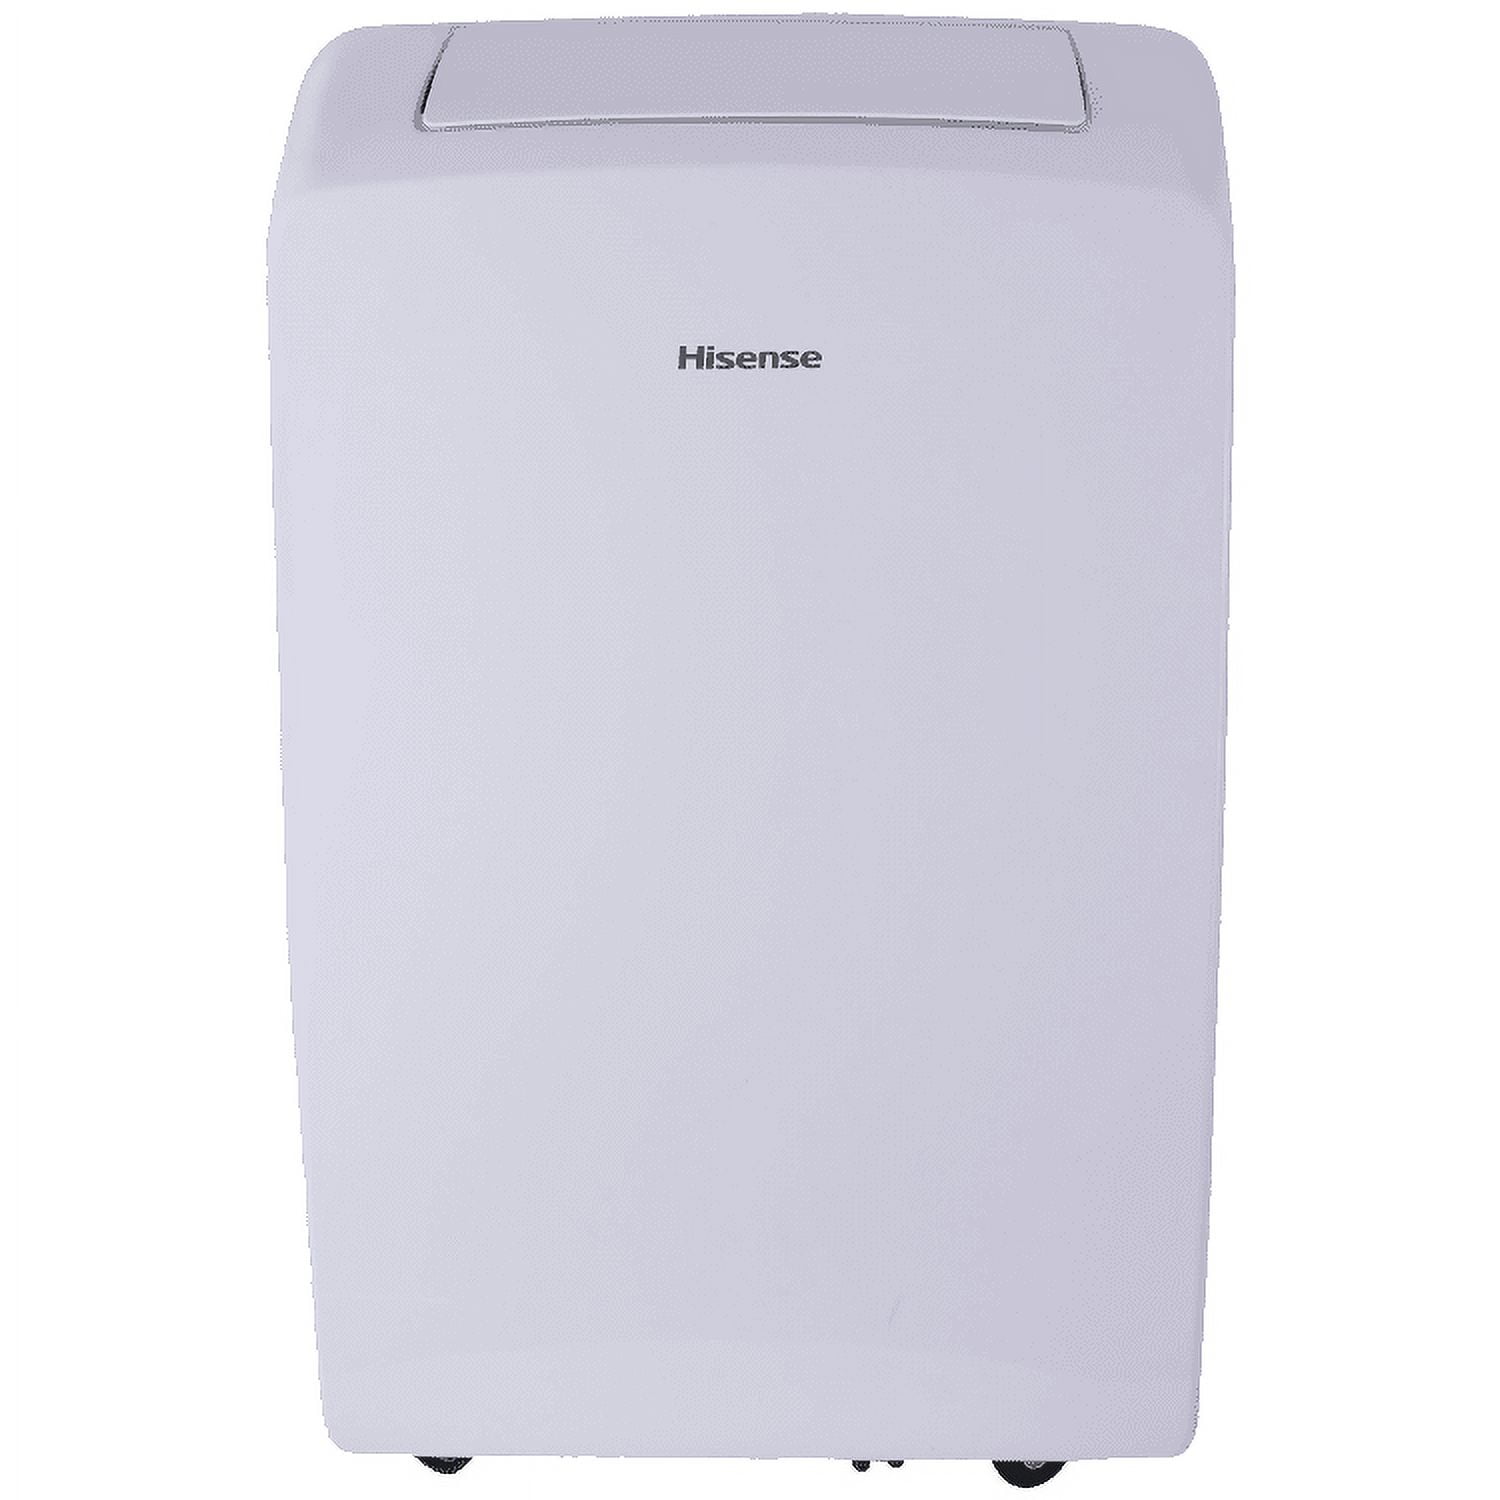 Restored Hisense 7,000 BTU 115V Portable Air Conditioner with Dehumidifier  and Wifi, White (Factory Refurbished)